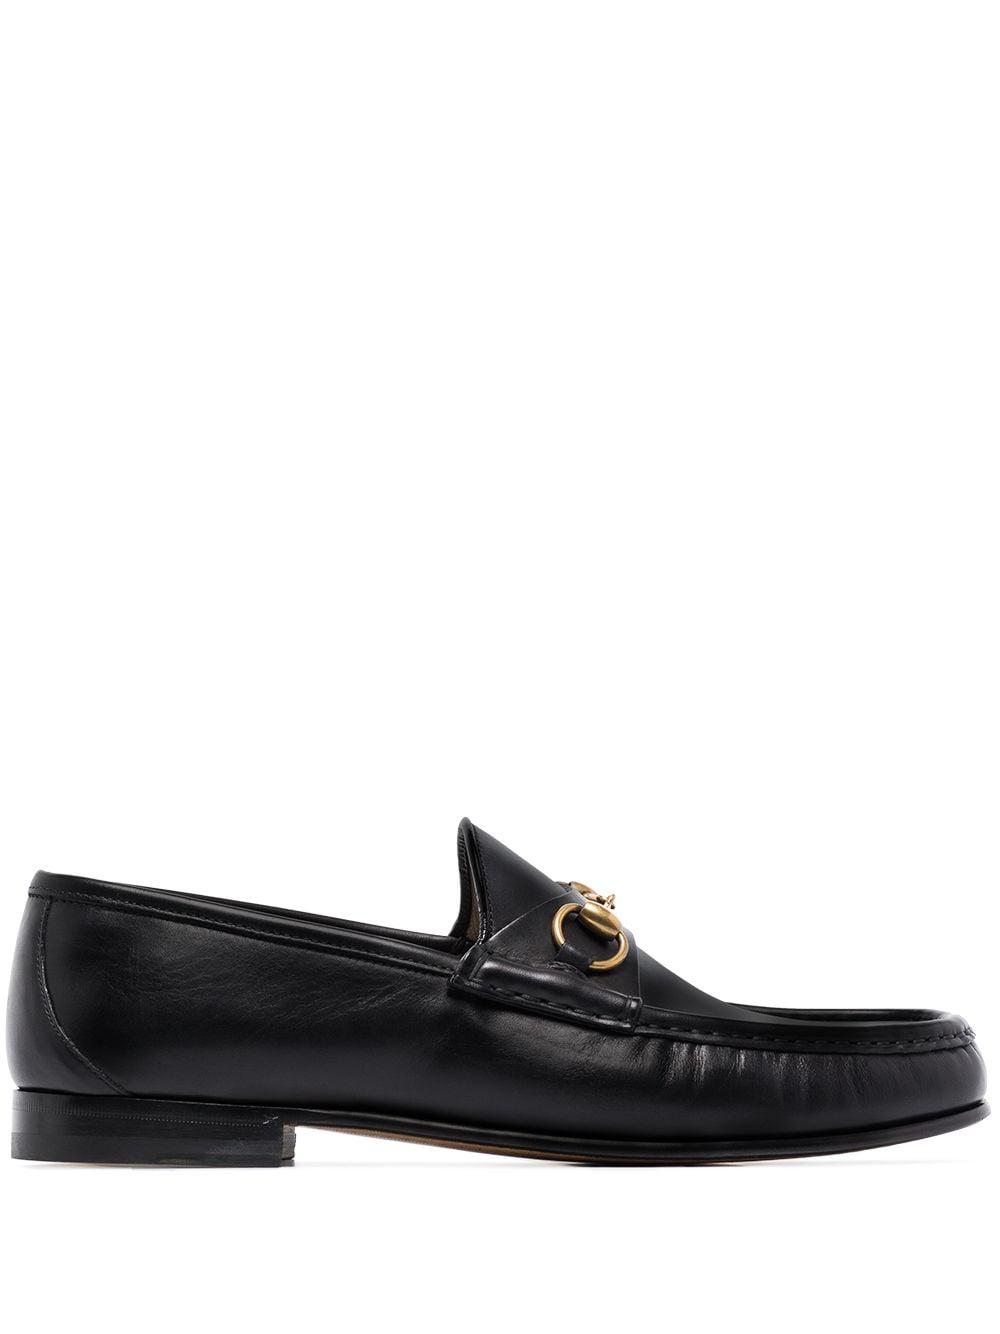 Gucci 1953 Horsebit Leather Loafer in Black for Men - Save 39% | Lyst